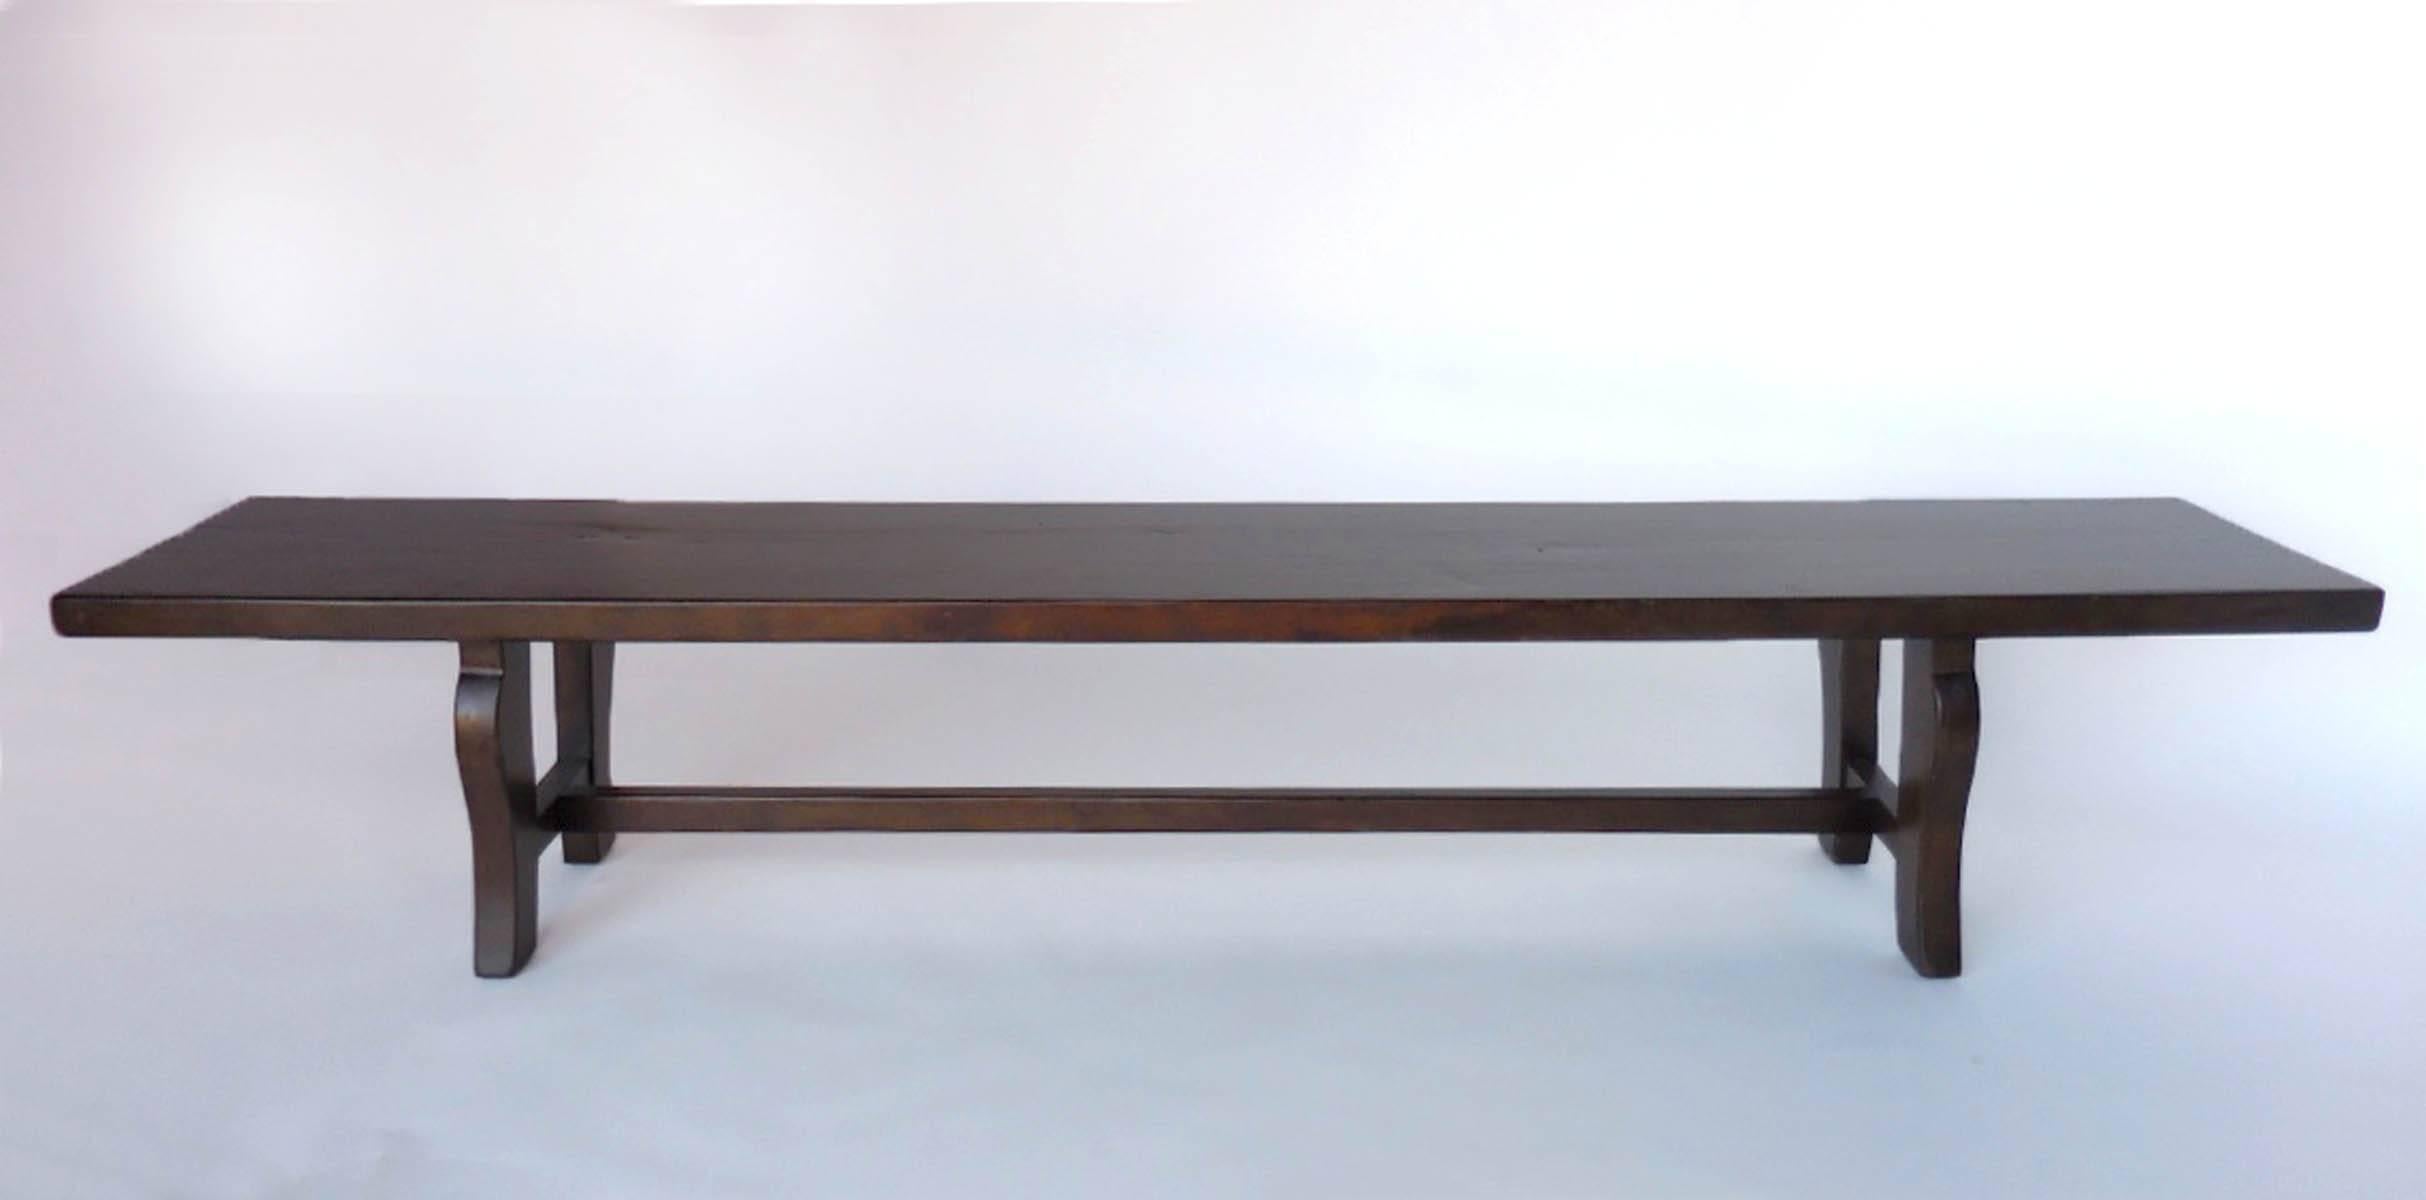 Our custom lyre bench in walnut wood with walnut #2 finish and light distress. Can be made in any size and finish, in walnut, oak or mahogany.
Made in Los Angeles by Dos Gallos Studio.
CUSTOM PRICES ARE SUBJECT TO CHANGE. PLEASE INQUIRE BEFORE